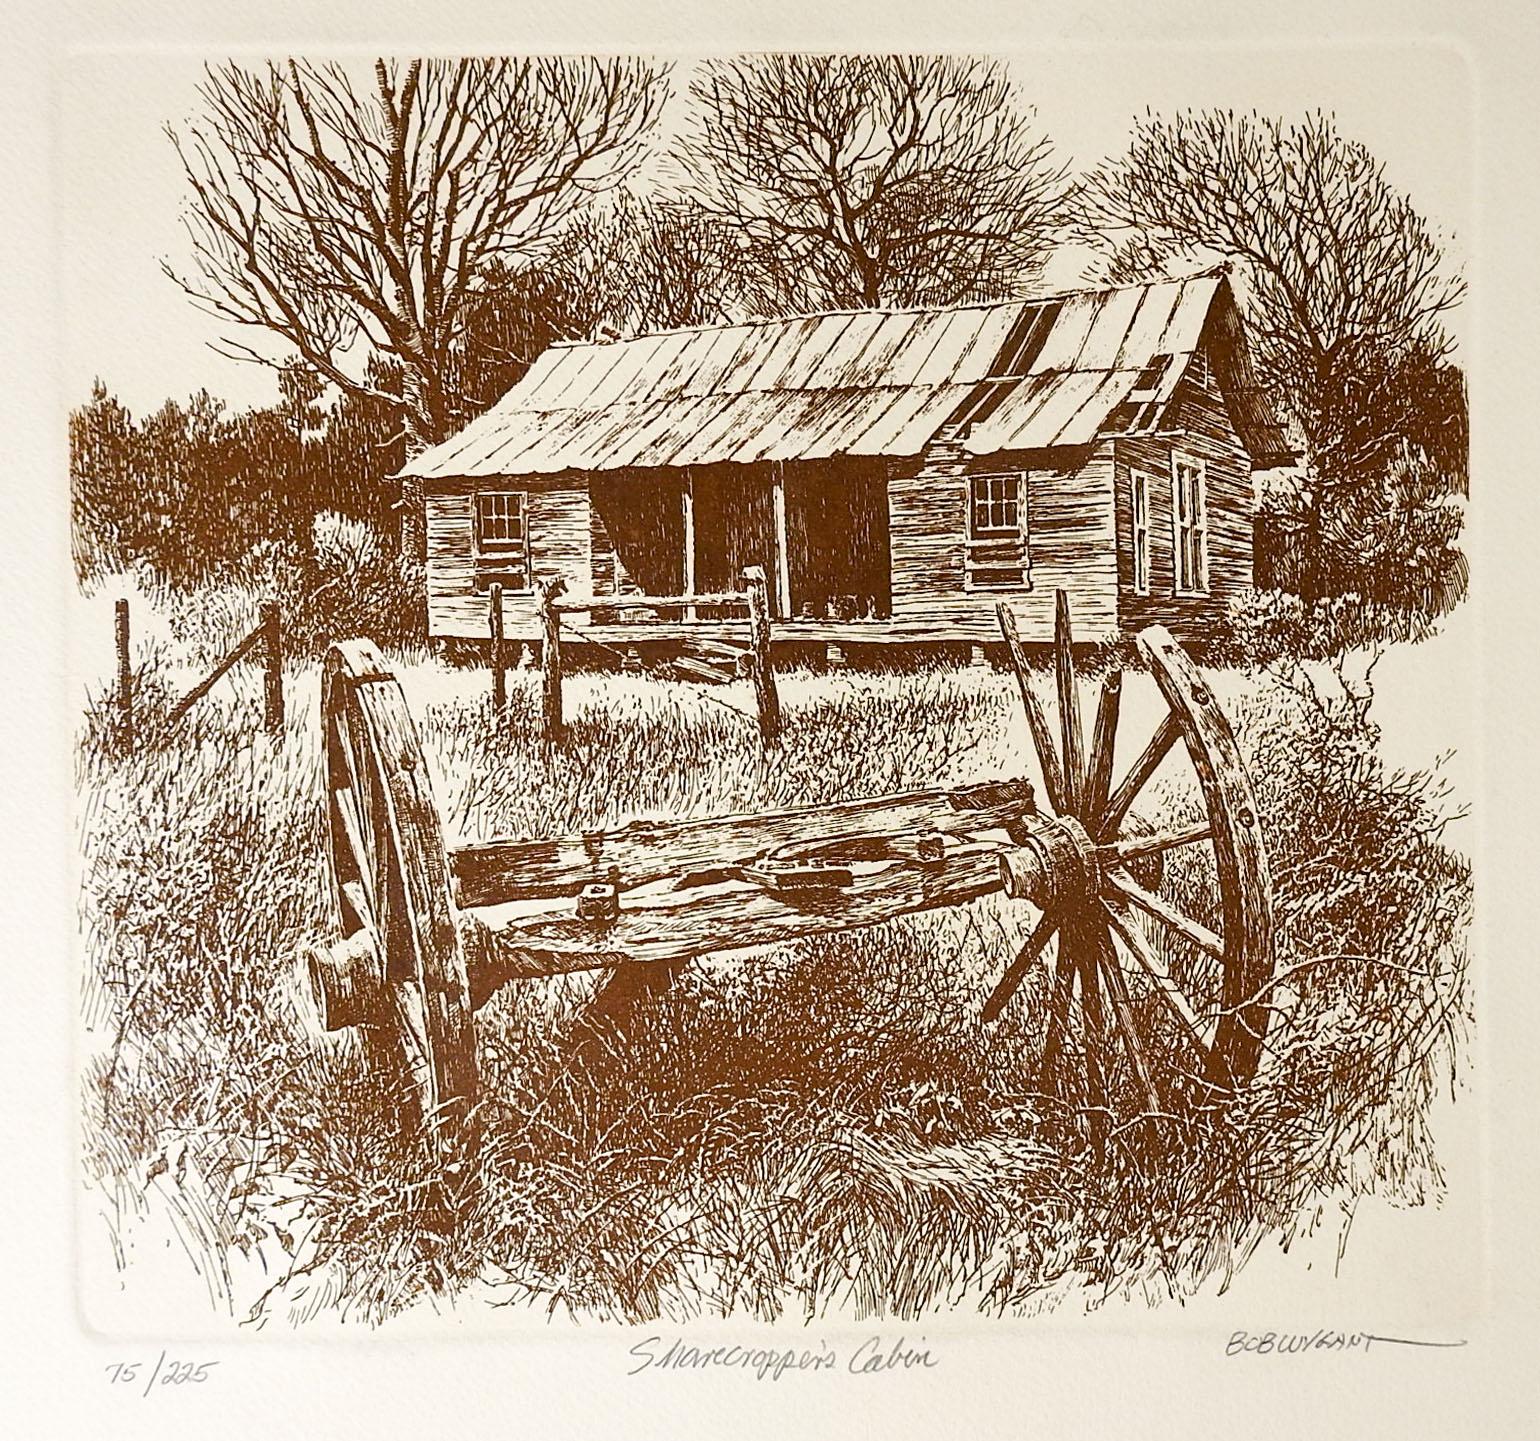 Pair of etchings on cream heavy paper by Bob Wygant (1927-2008) Texas. Signed, titled Sharcropper's Cabin, numbered 75/225 and signed, titled Post office At Call, numbered 6/10 AP. Unframed, image size 10